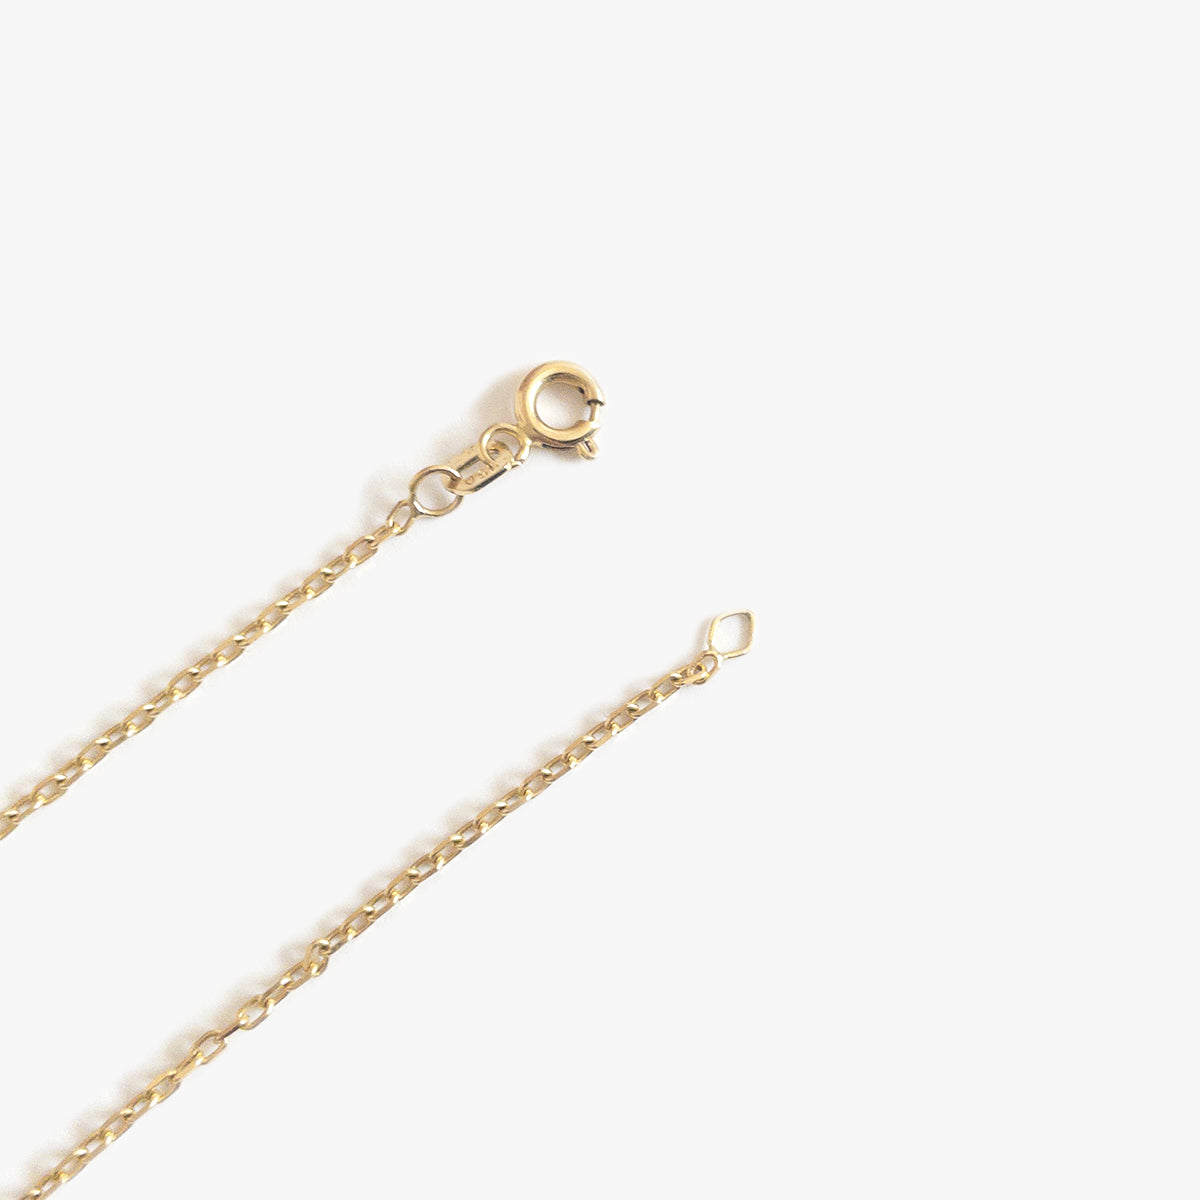 The Minimalist Hardware Necklace in Solid Gold